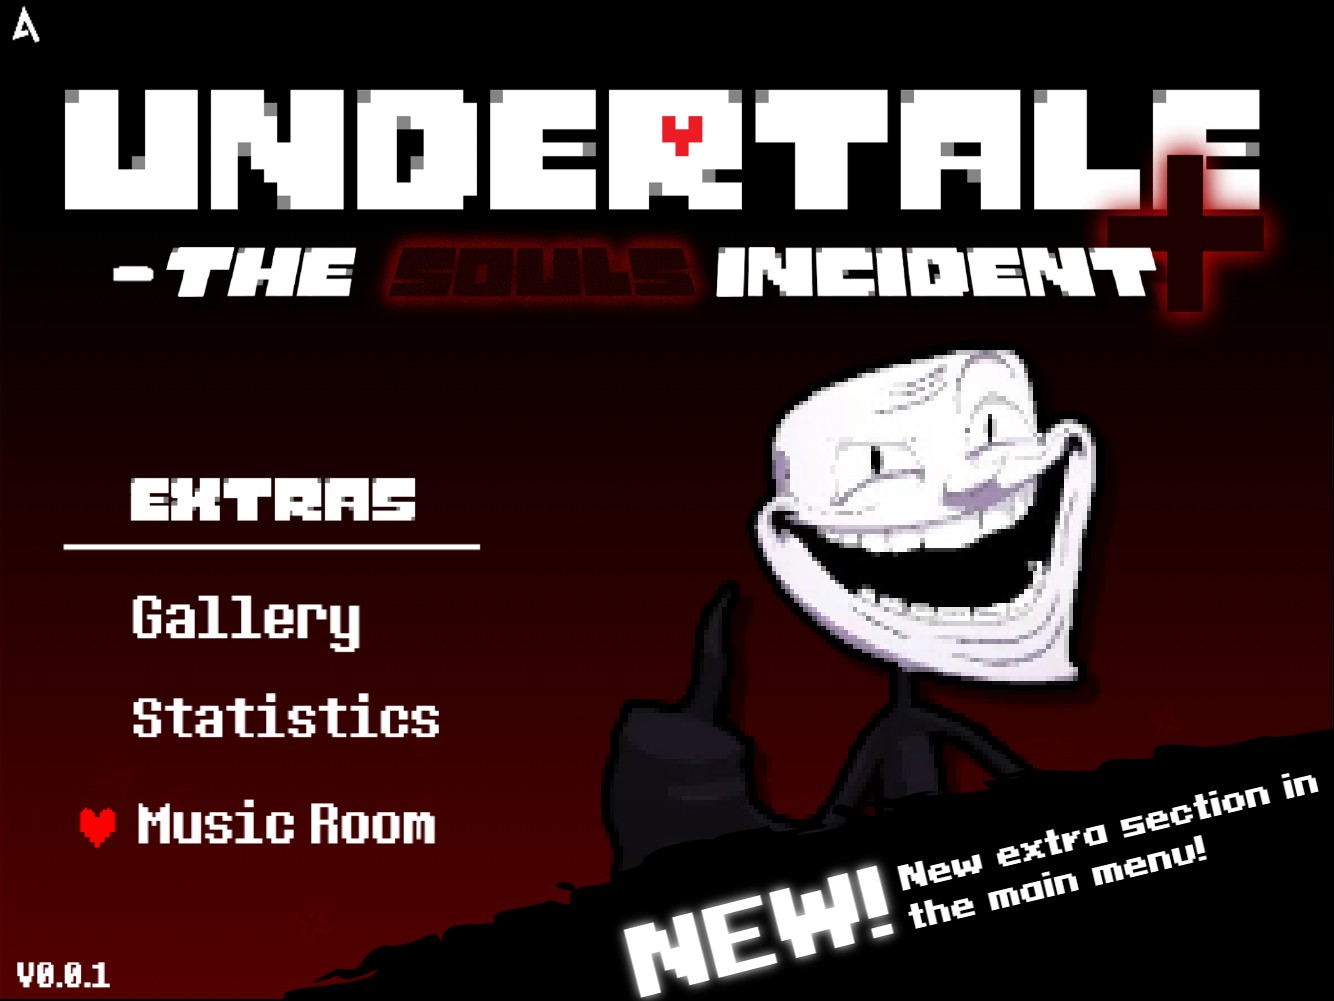 How To Download and Setup Multiplayer Undertale! 